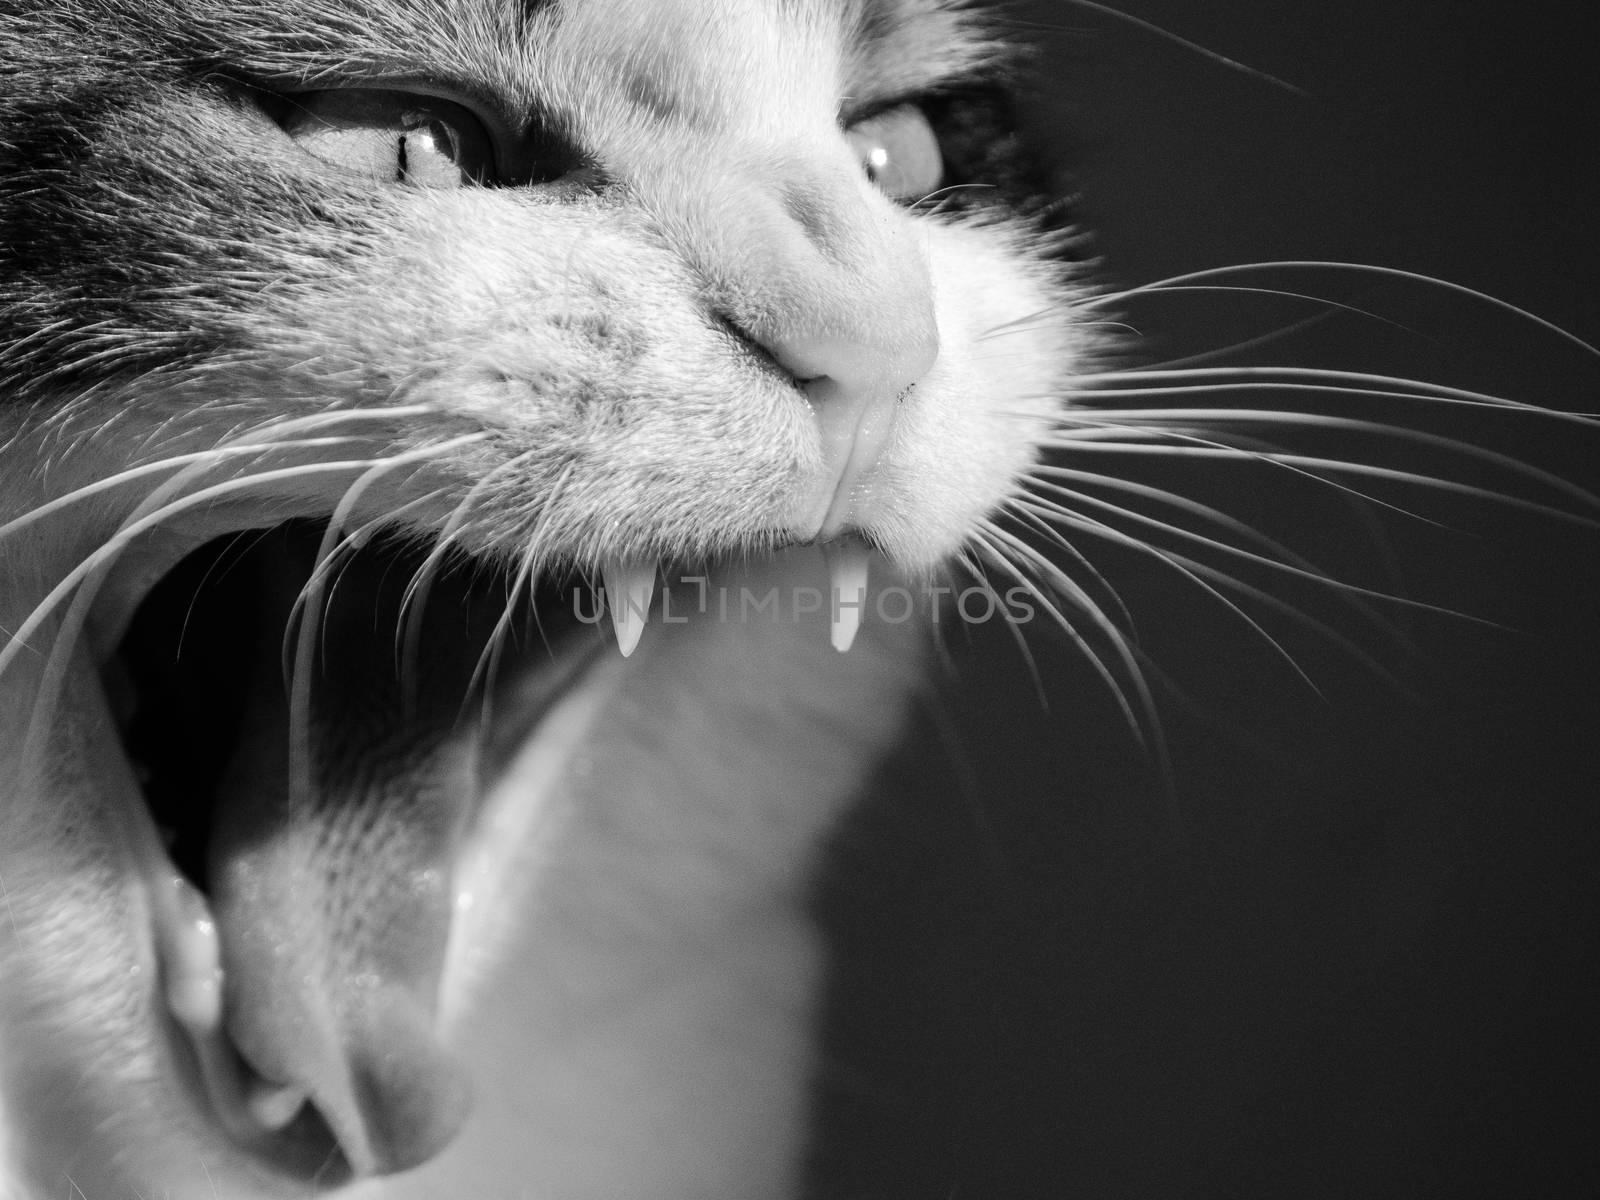 Cat yawning. Cat with its mouth open showing its teeth. Hissing.